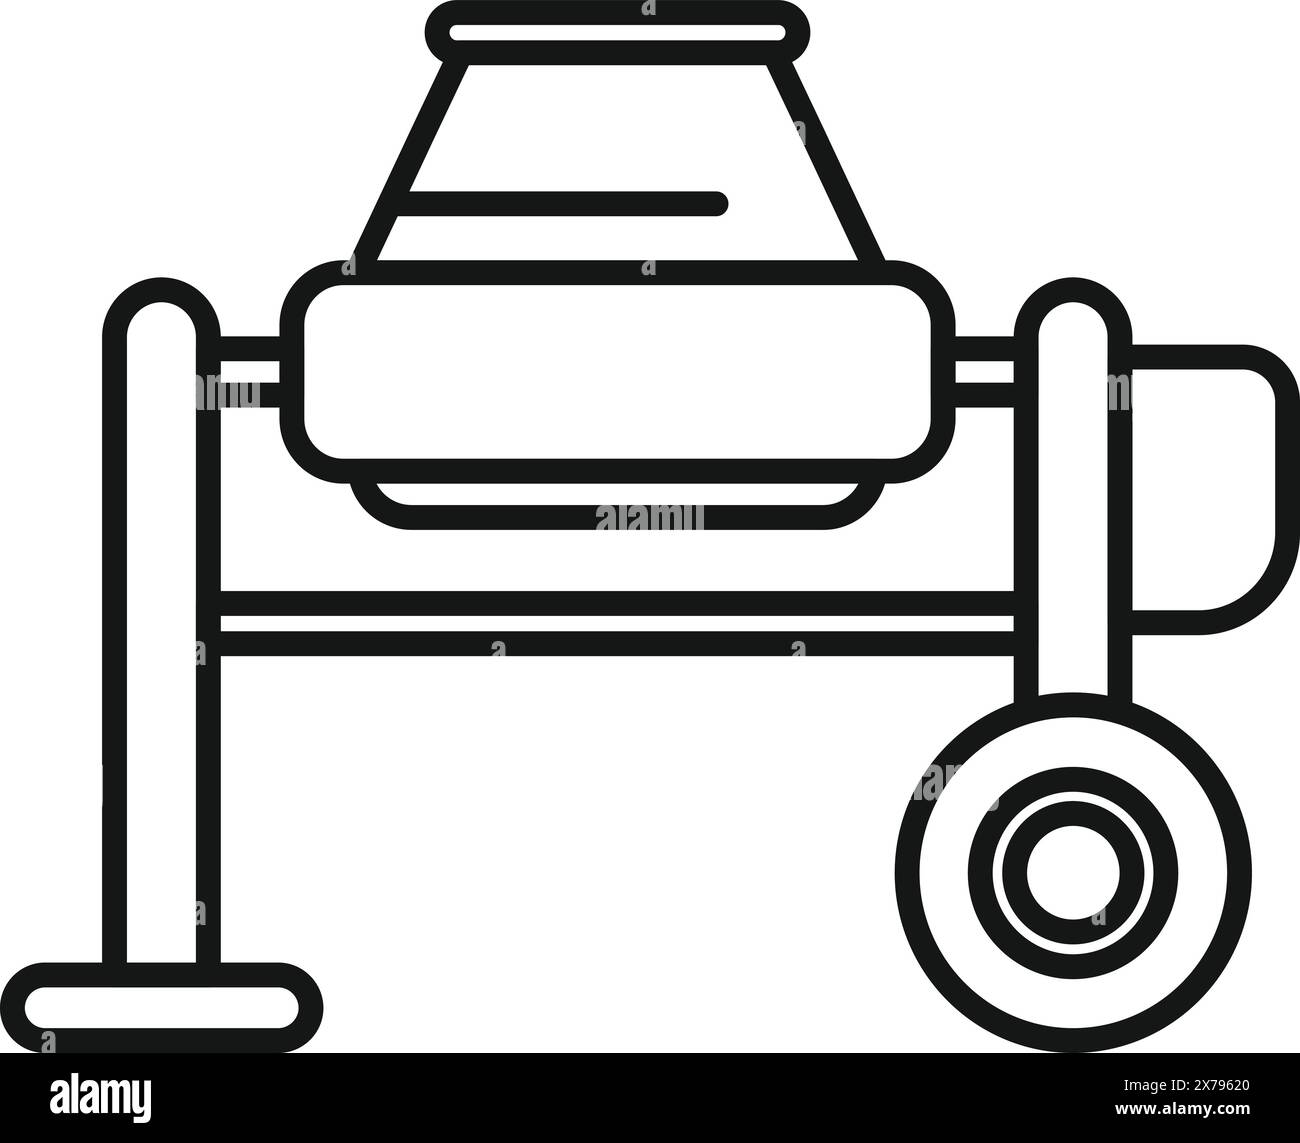 A black and white line art icon representing a medical stretcher or hospital gurney Stock Vector